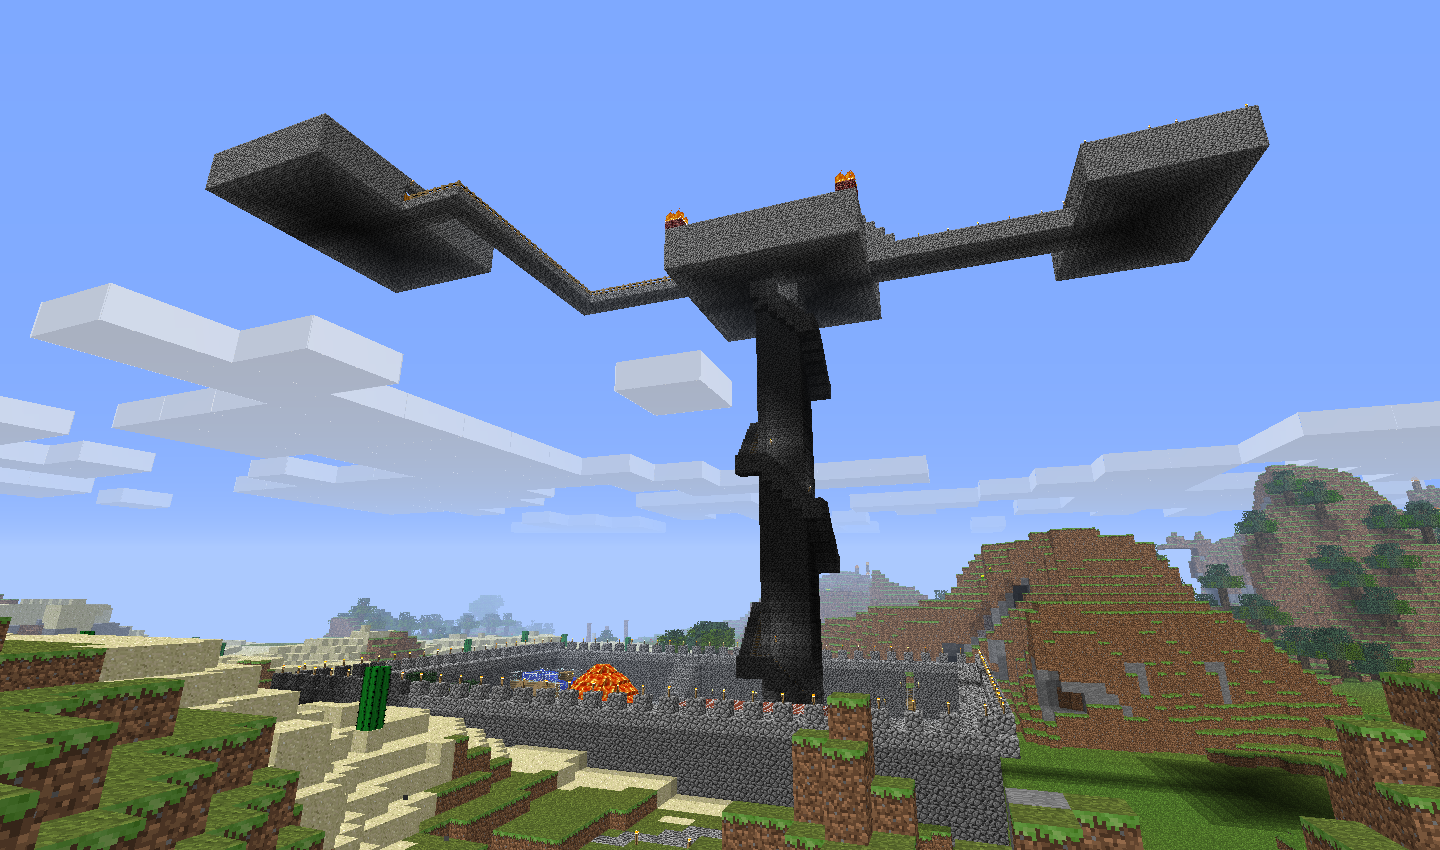 MMO Moose: Minecraft Sky City in the Making